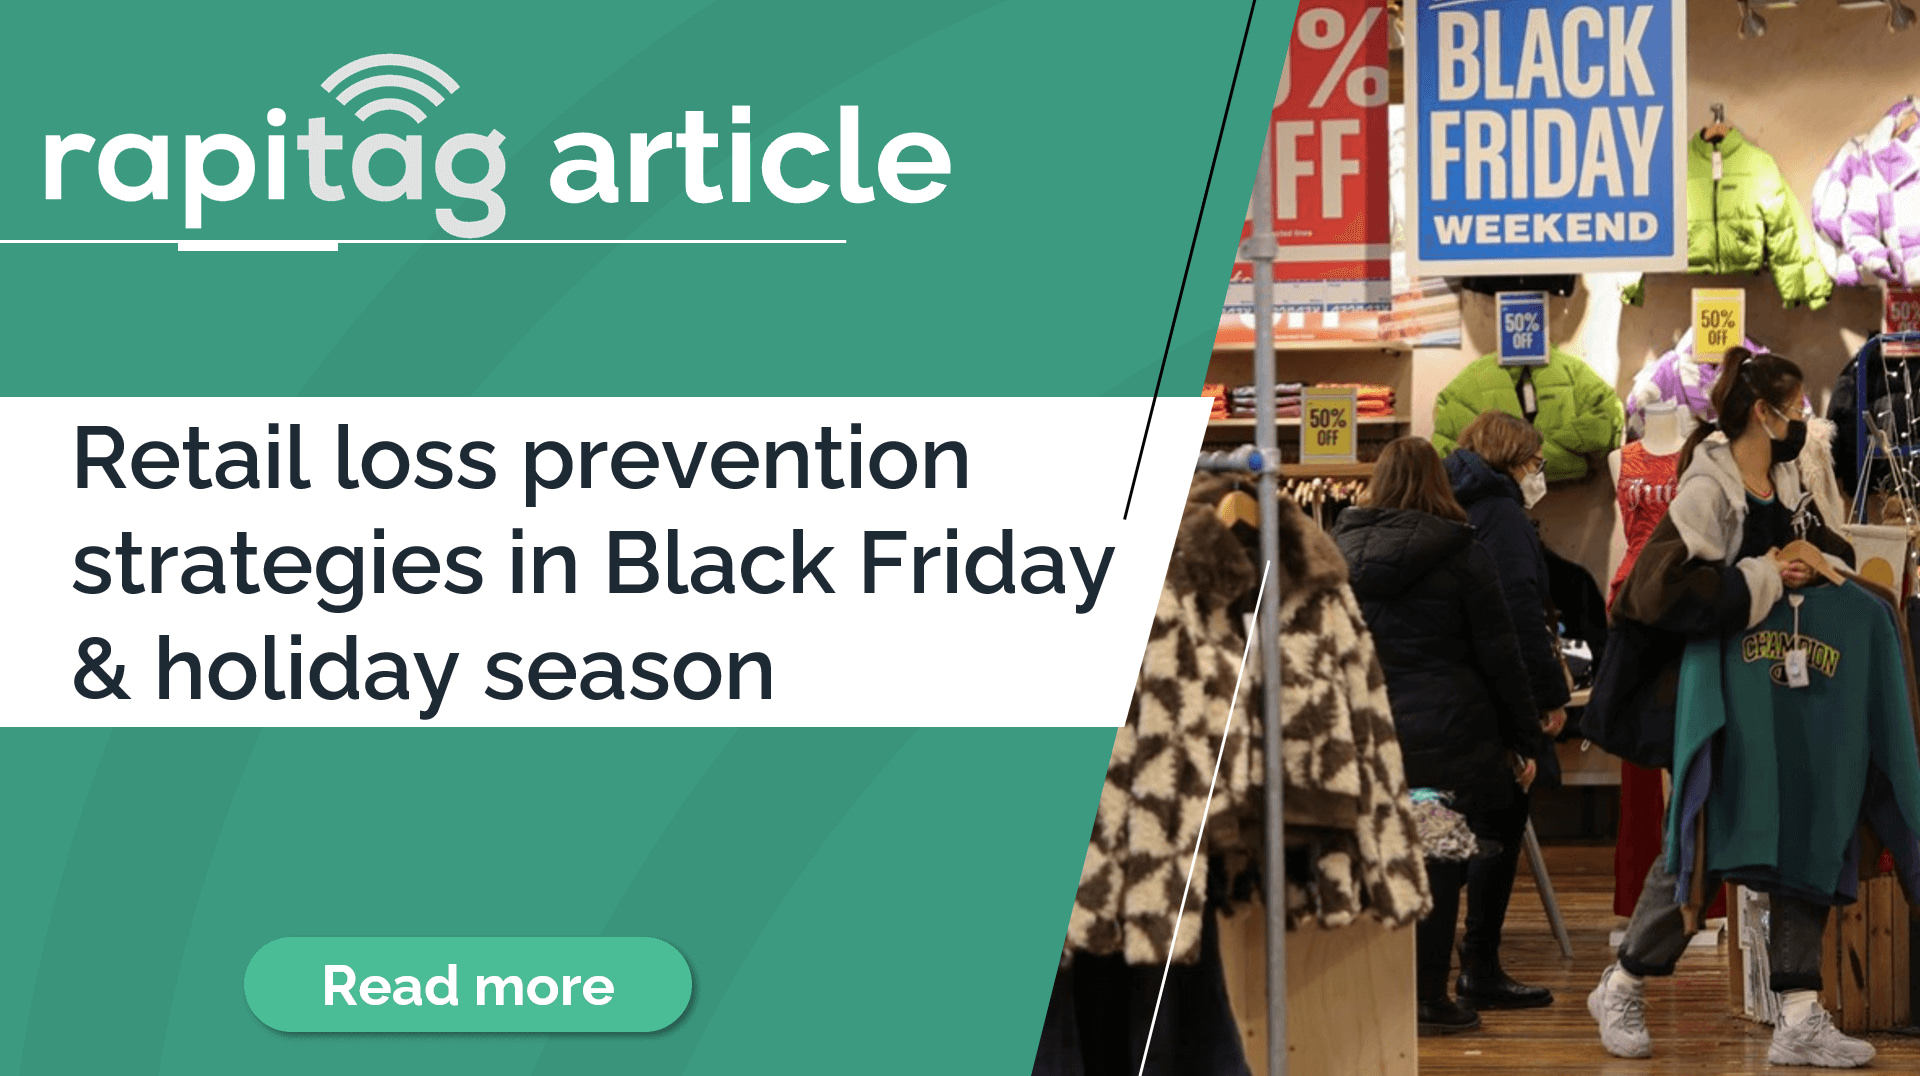 Retail loss prevention strategies in Black Friday and holiday season